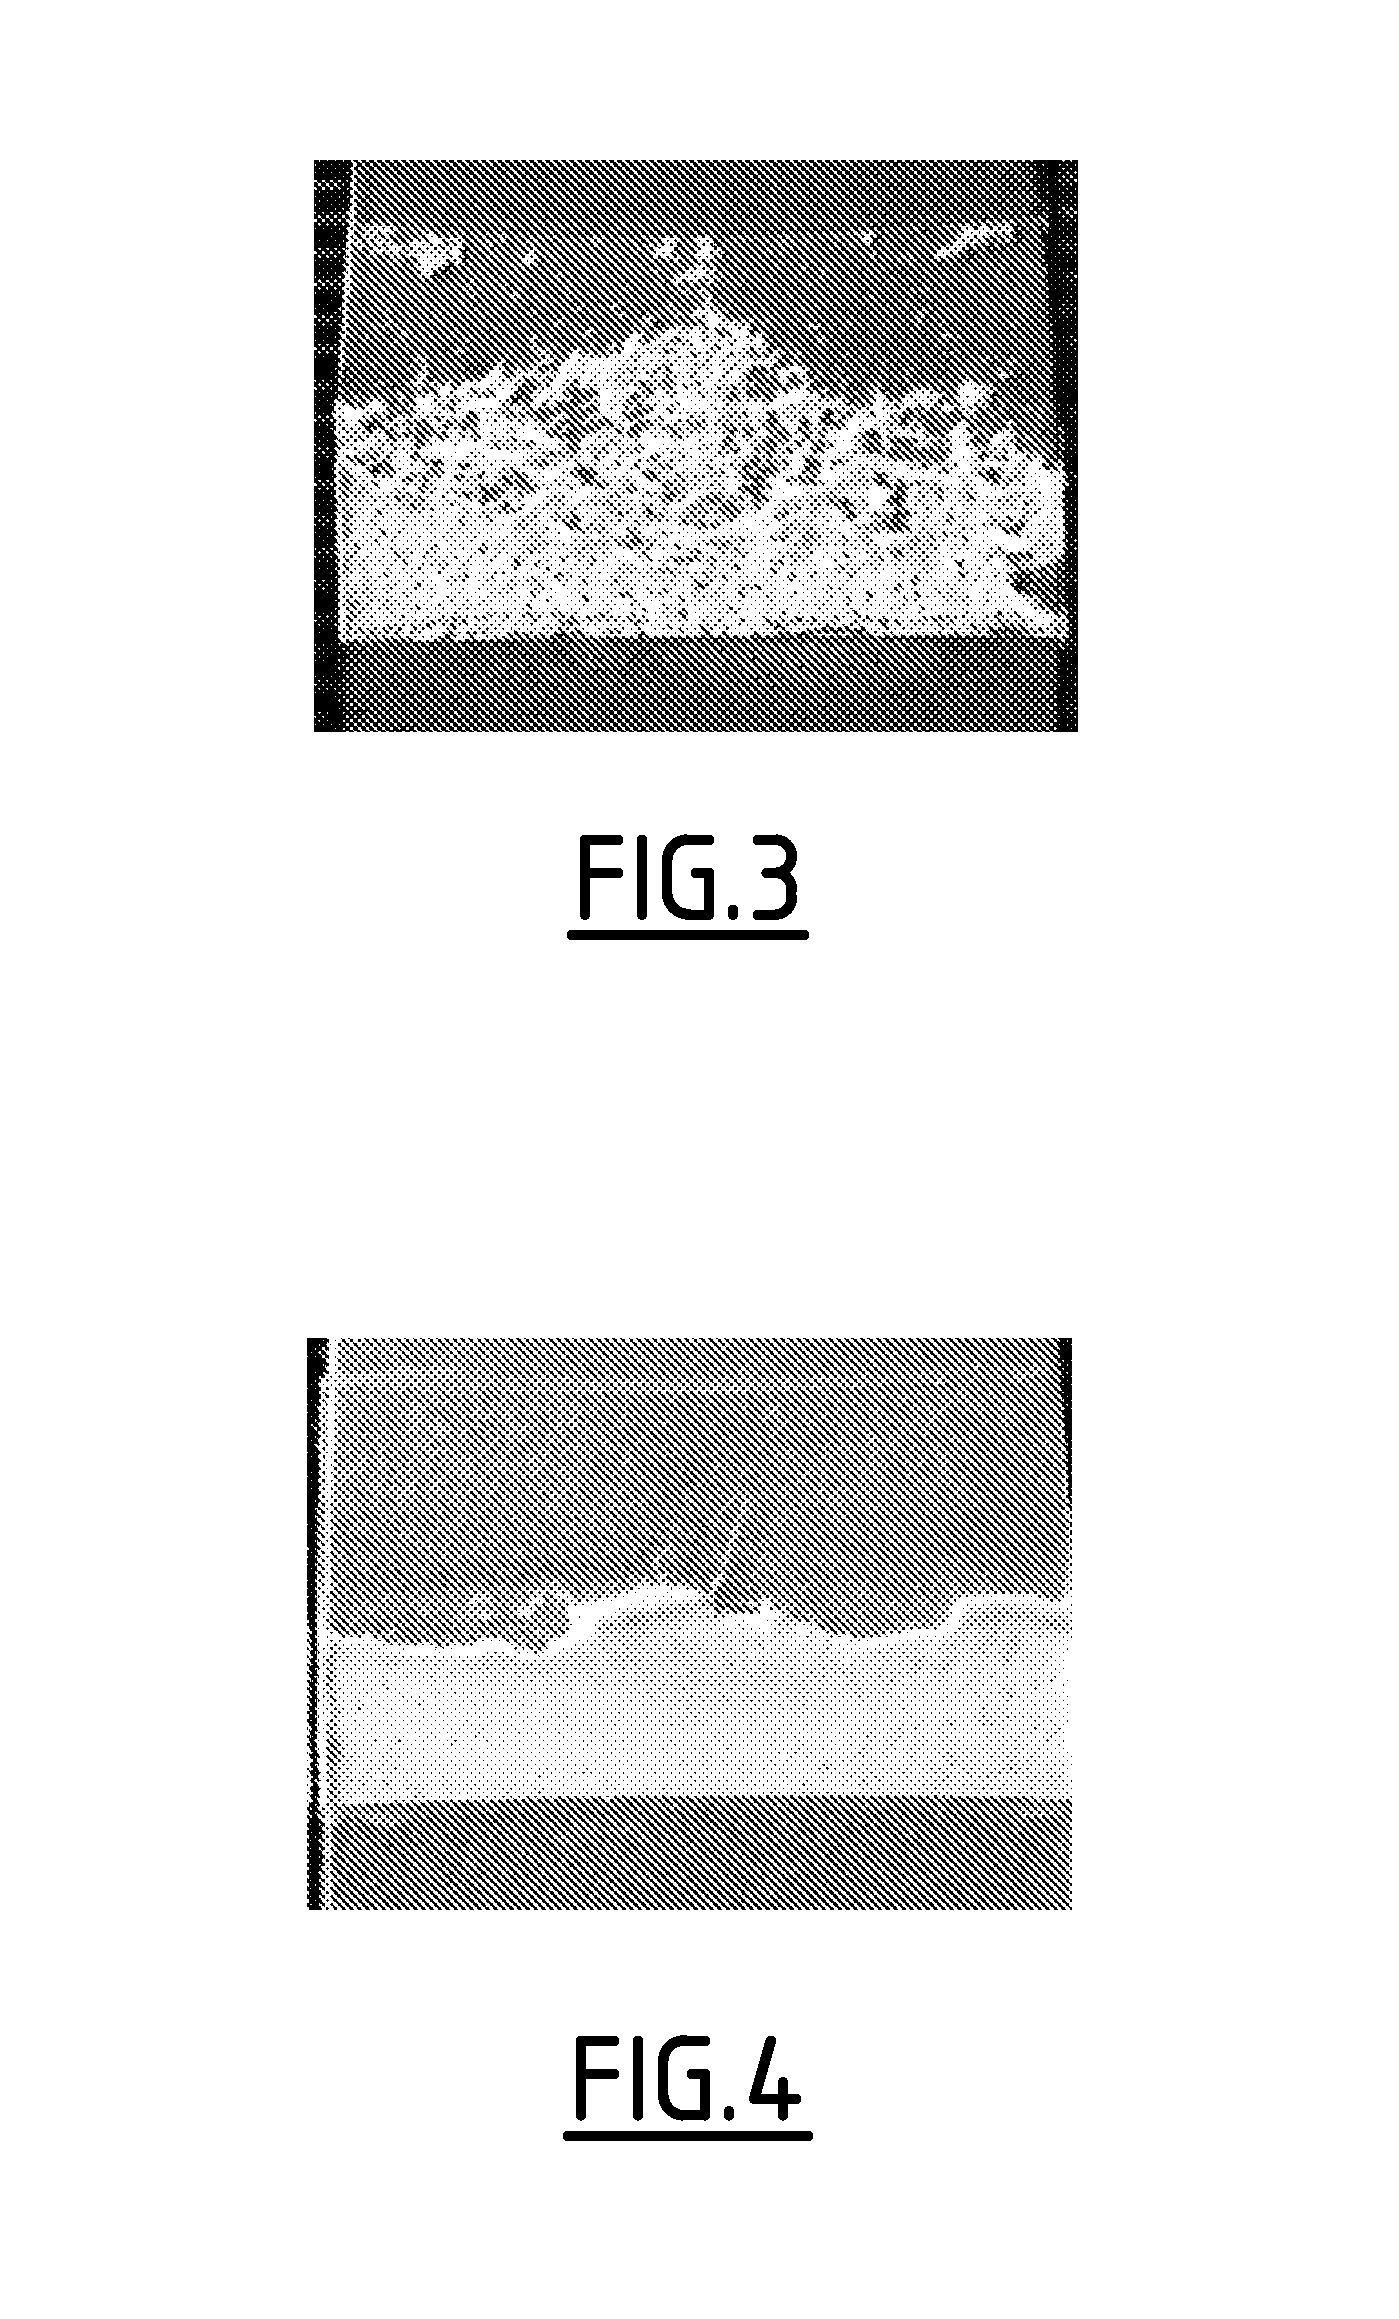 Method for producing a metal sheet having zn-al-mg coatings comprising the application of an acid solution and an adhesive, and corresponsing metal sheet and assembly